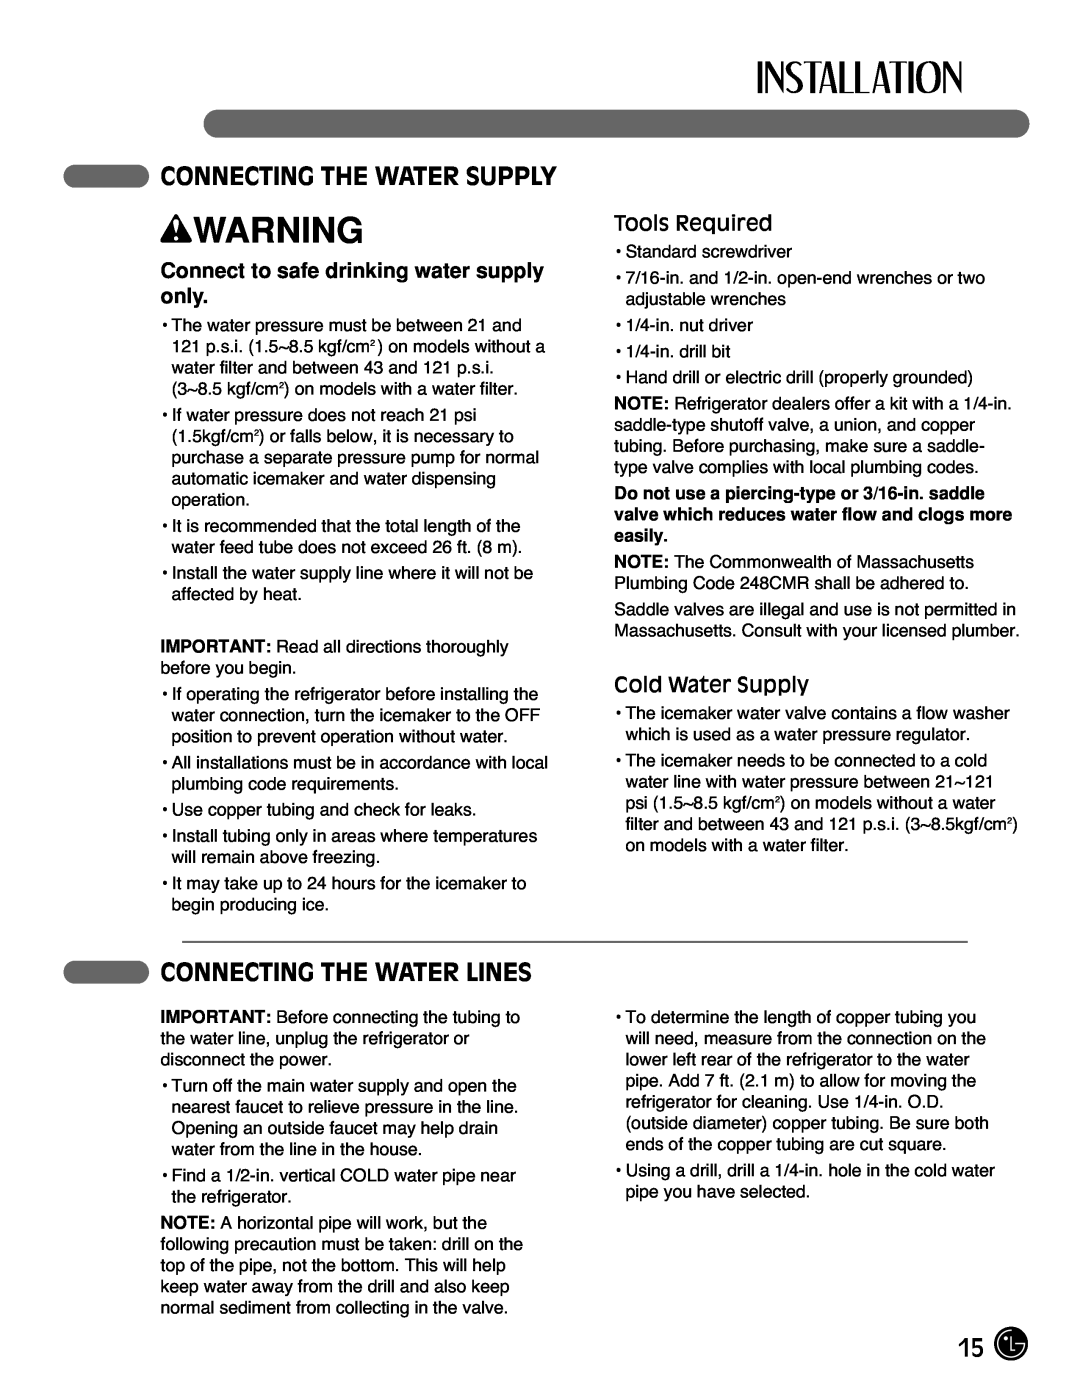 LG Electronics LFC25770 manual Connecting The Water Supply, Connecting The Water Lines, Tools Required, Cold Water Supply 